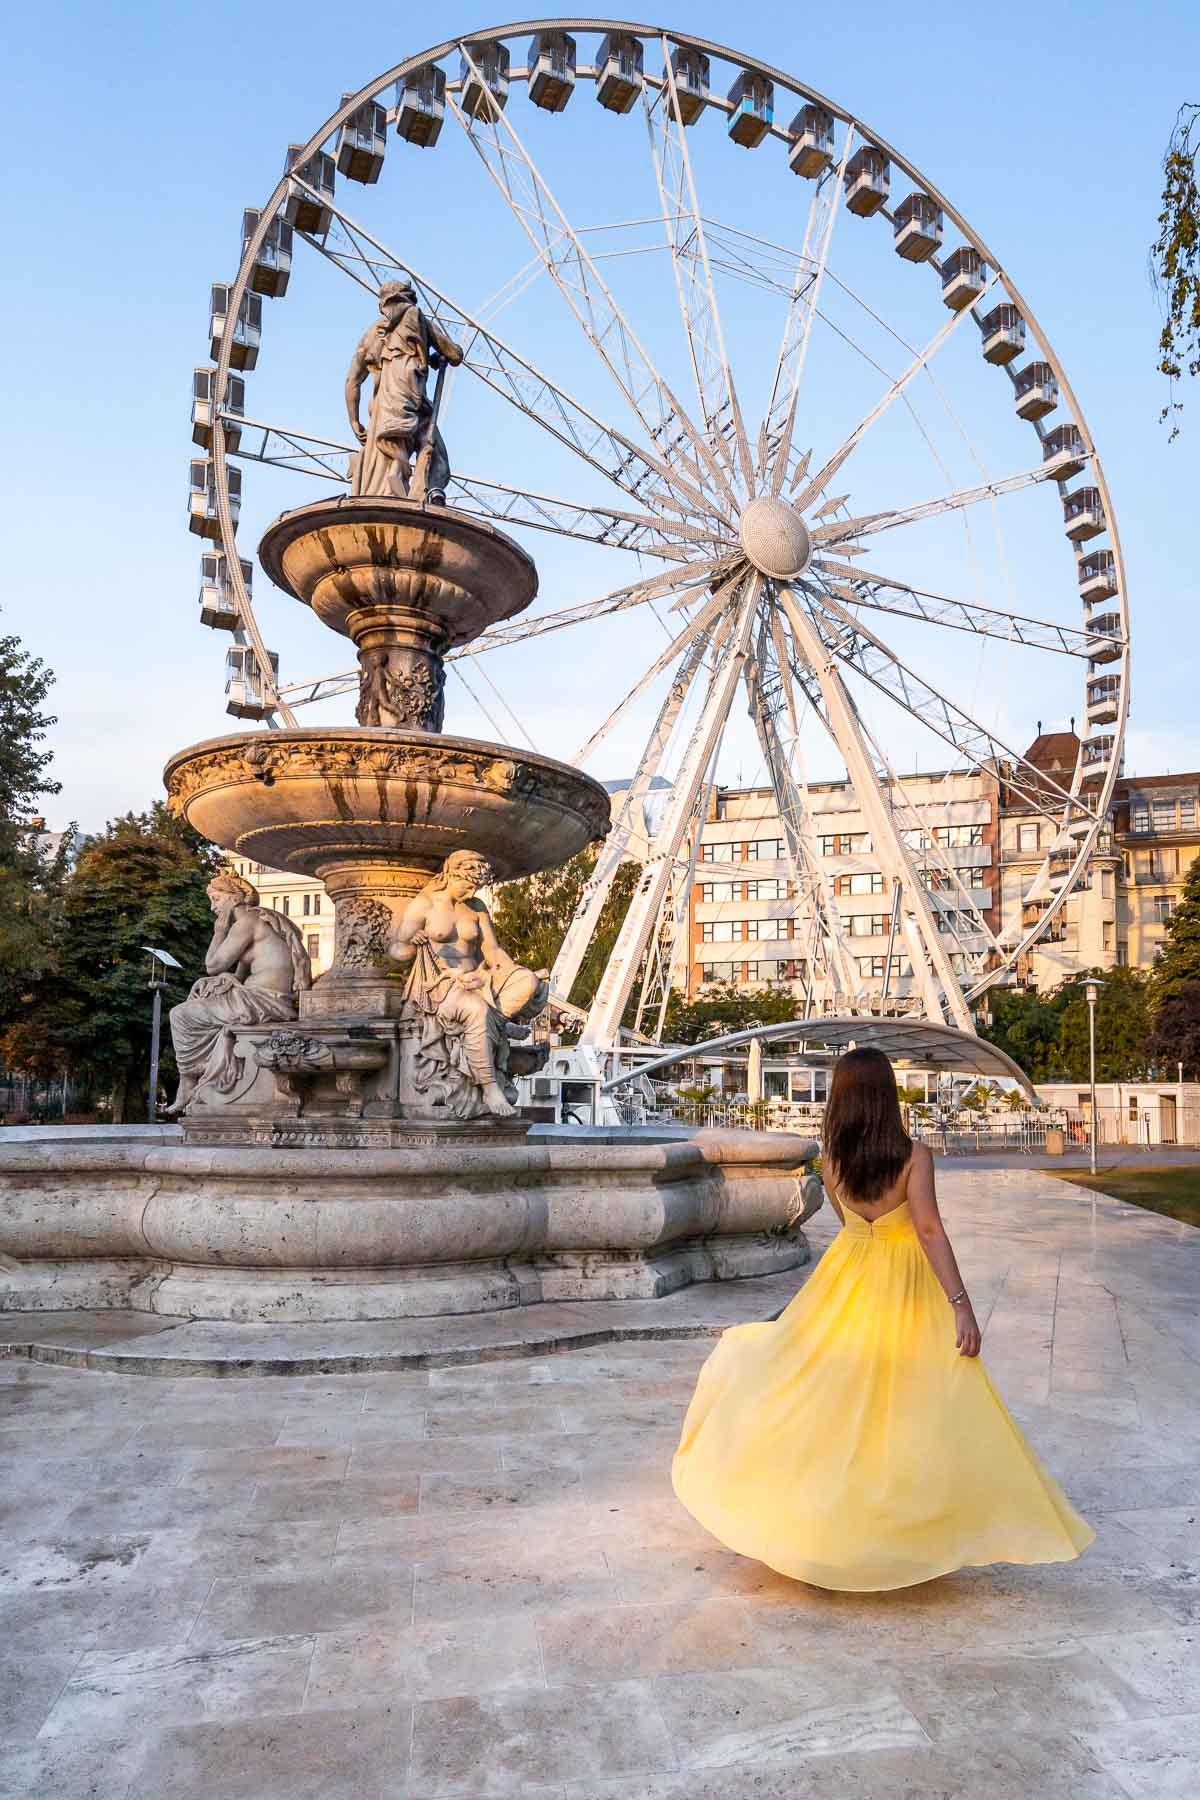 Girl in a yellow dress twirling in front of the Budapest Eye